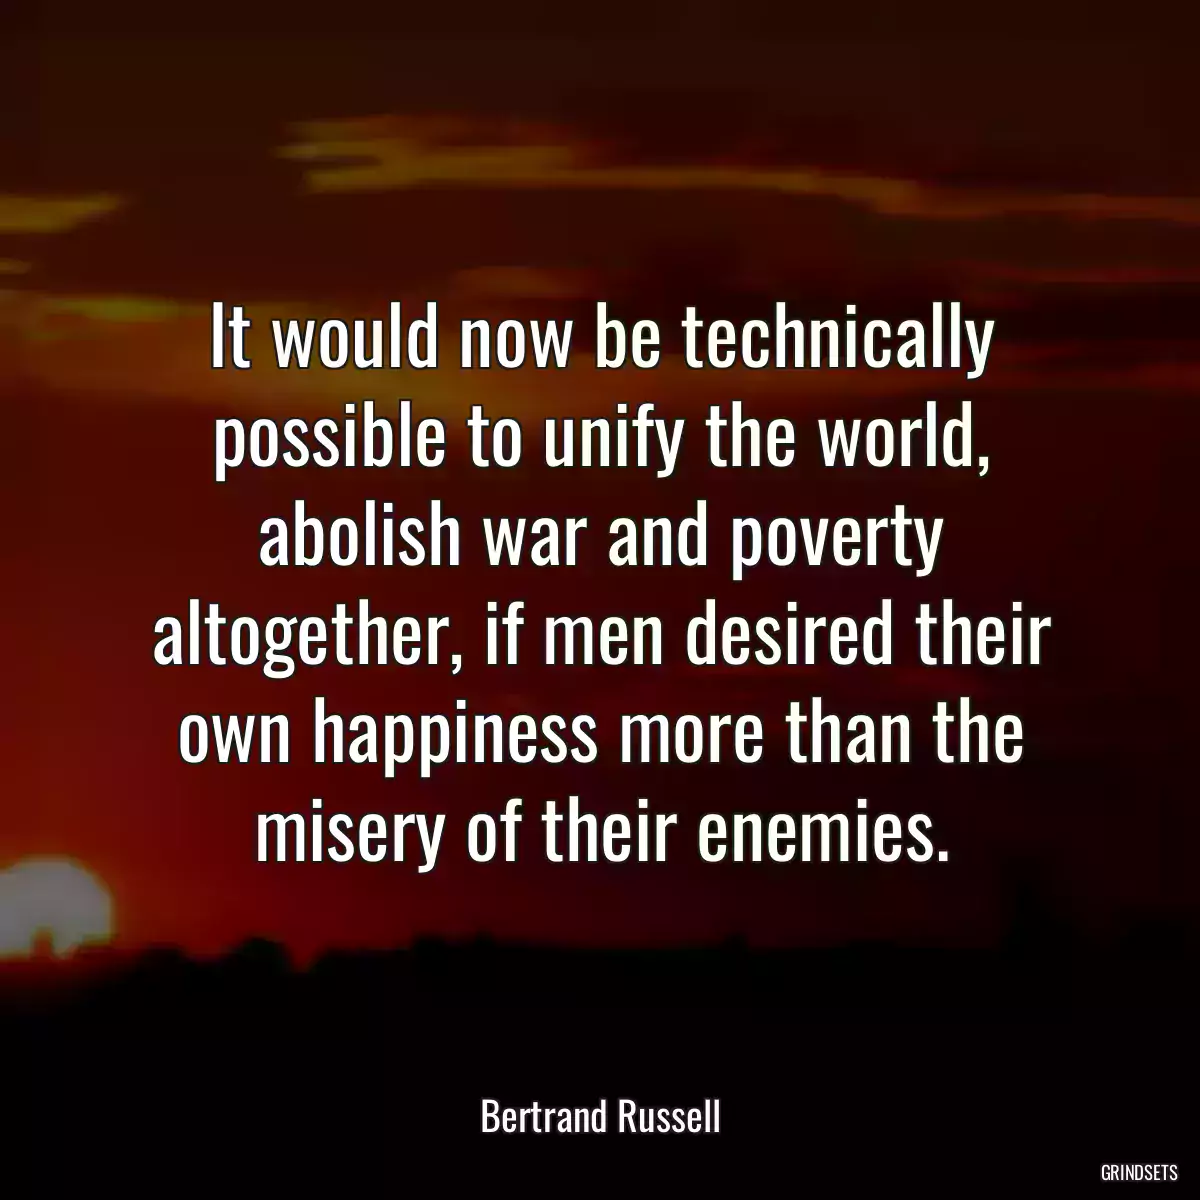 It would now be technically possible to unify the world, abolish war and poverty altogether, if men desired their own happiness more than the misery of their enemies.